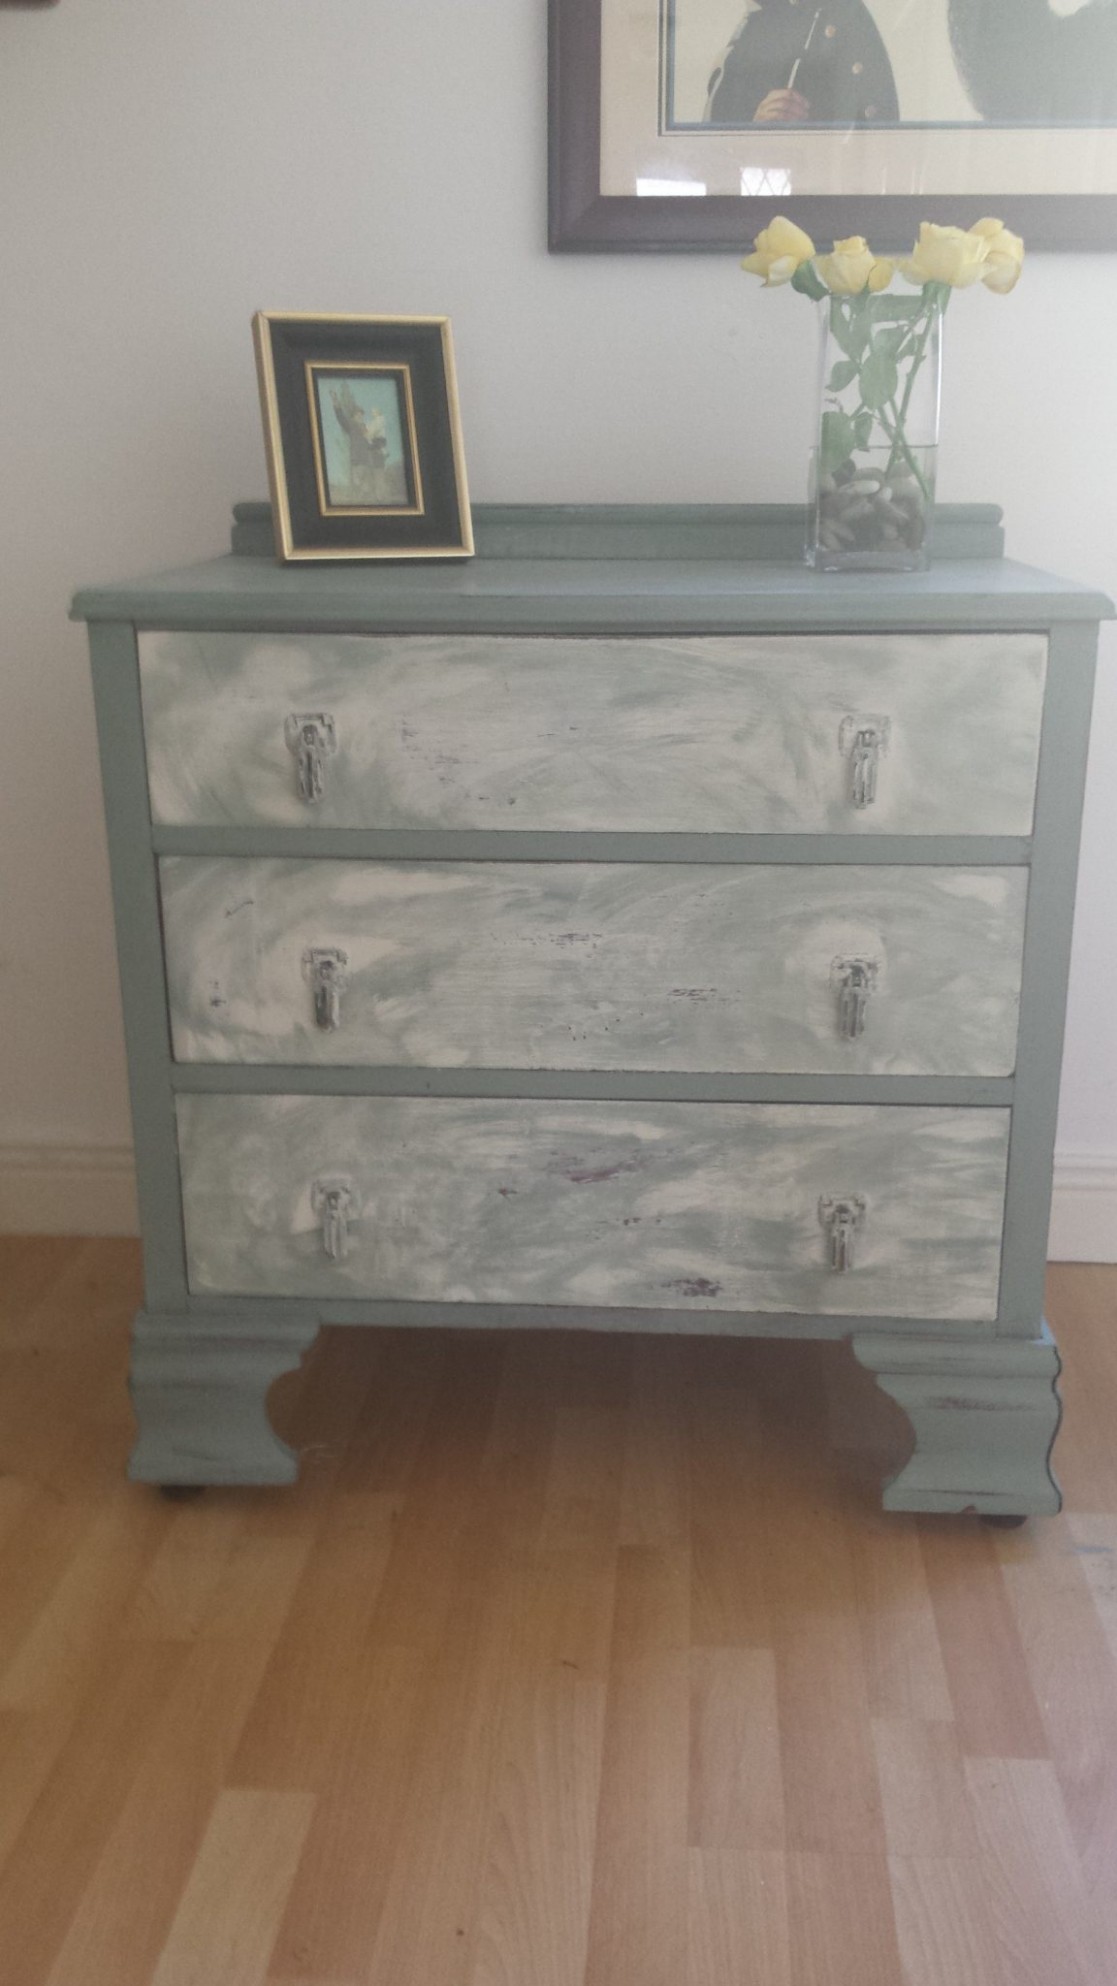 Chalk Paint Up Cycling Furniture Irish Nomad Where To Buy Annie Sloan Chalk Paint Houston Tx